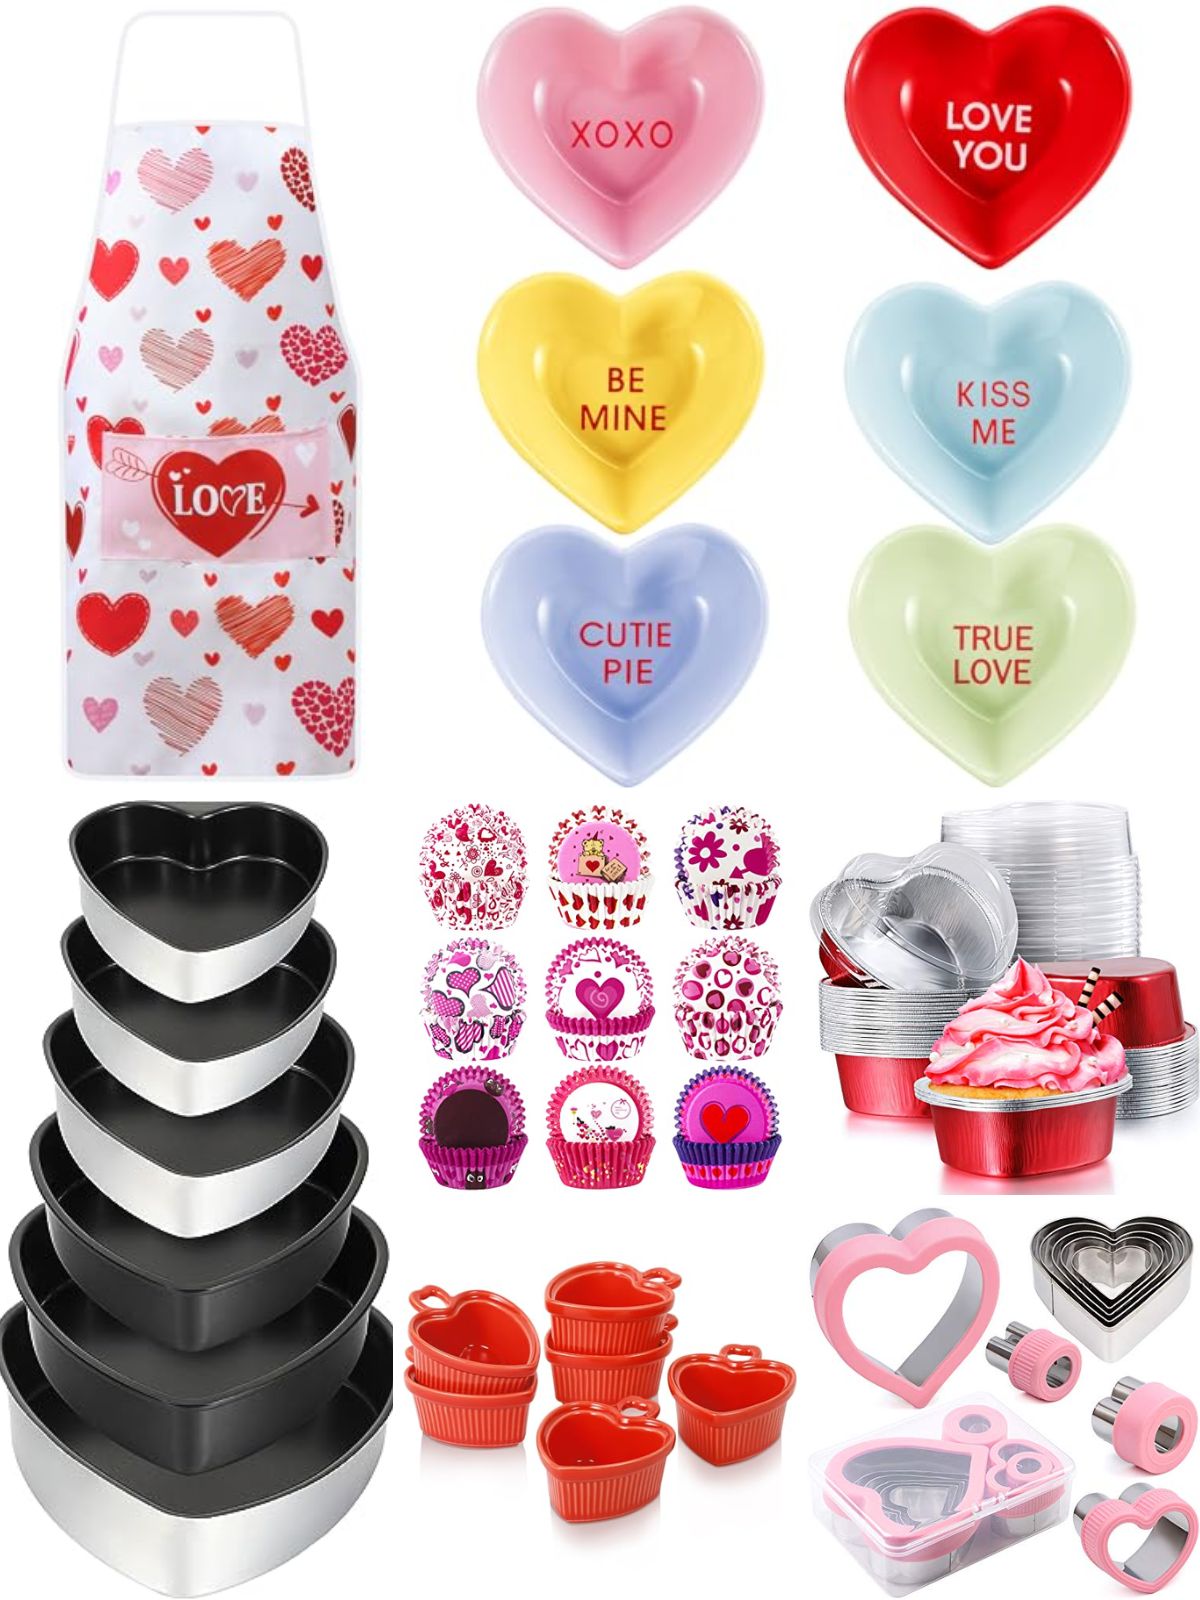 Bakeware for Valentine's Day from Amazon.